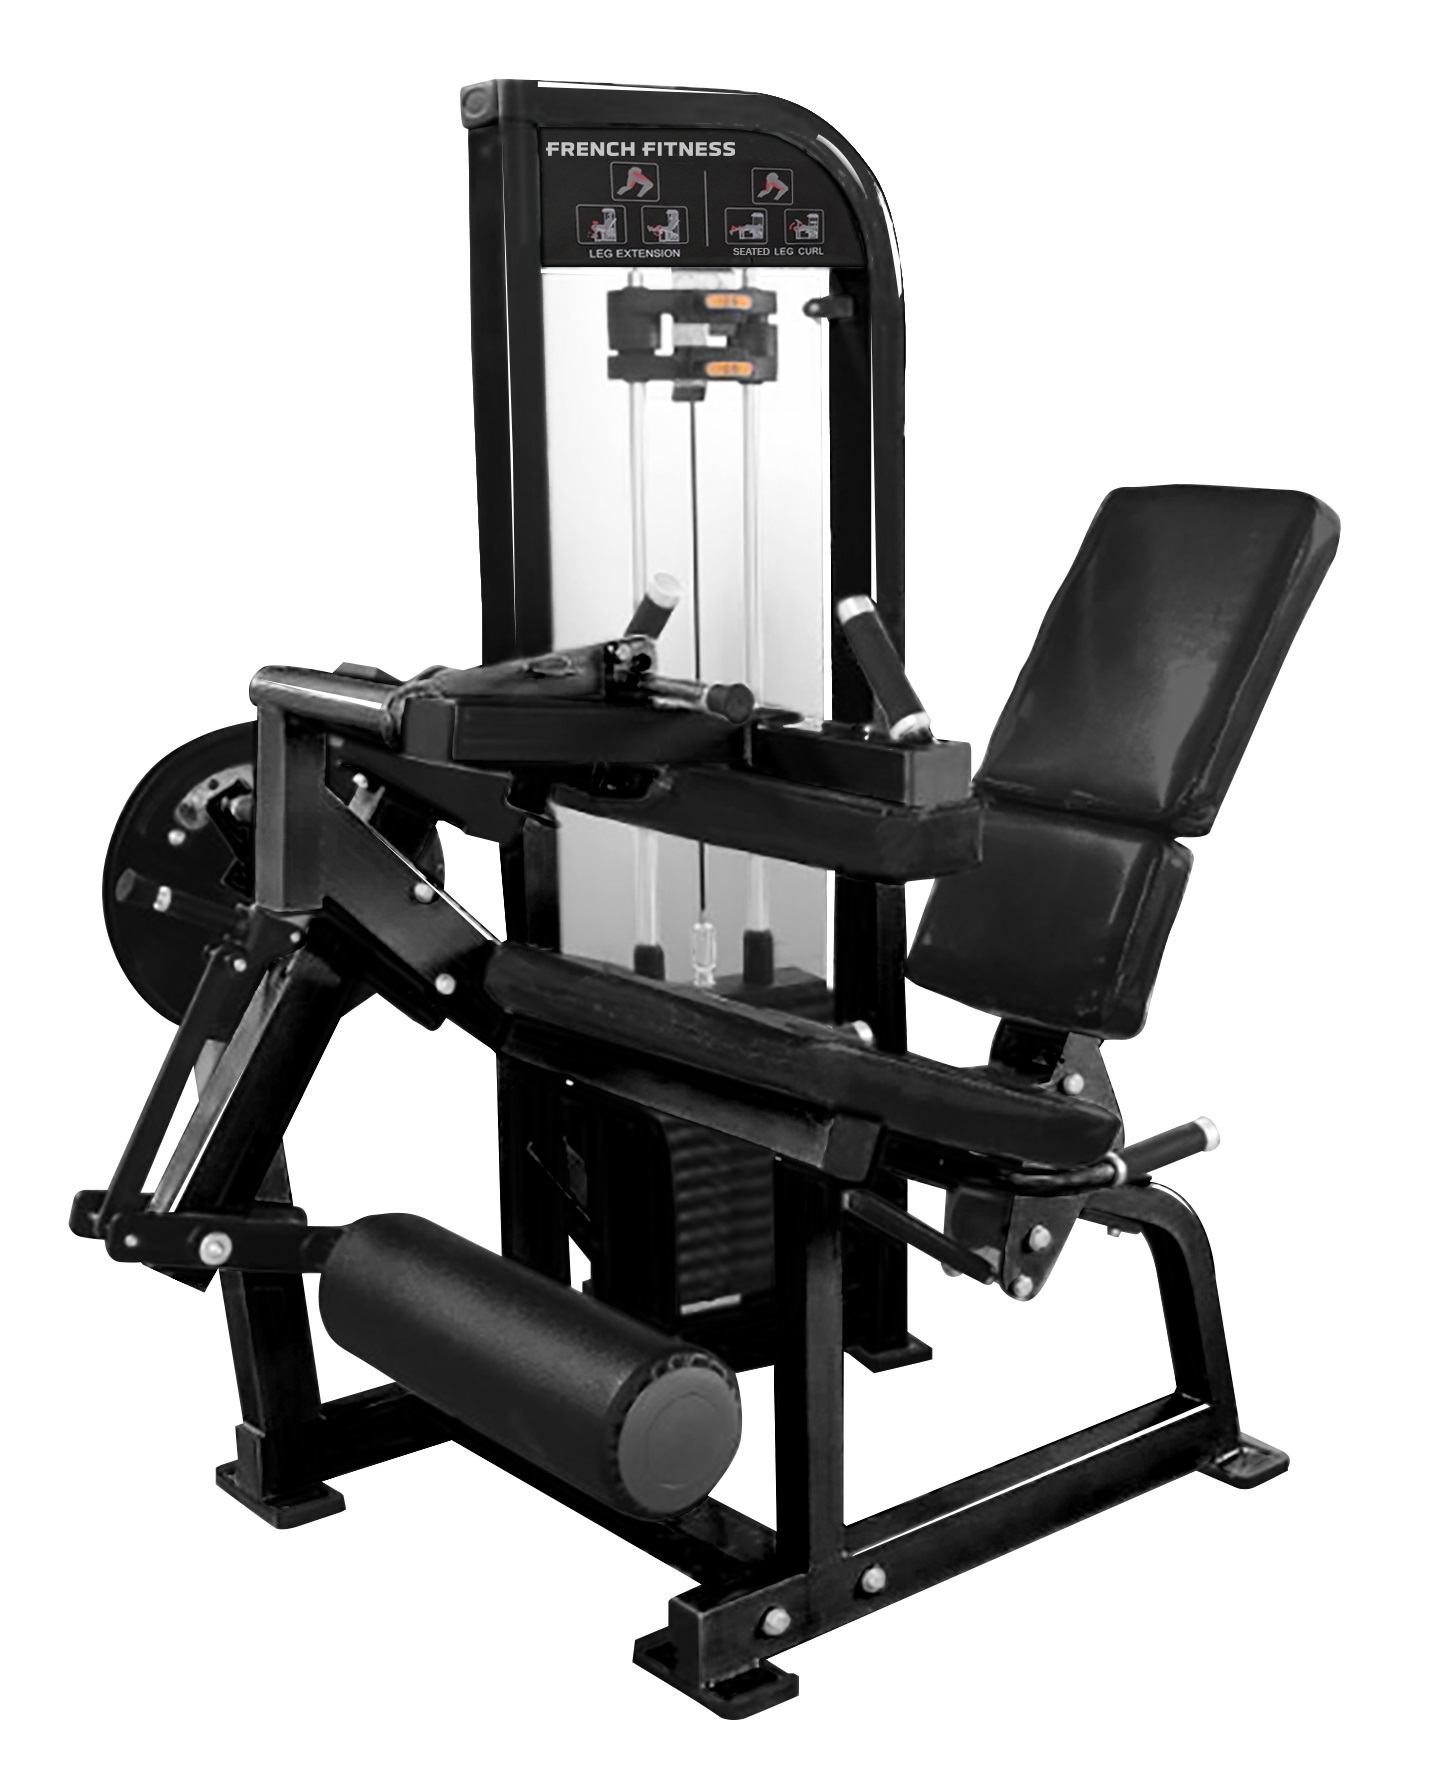 French Fitness Tahoe Seated Leg Curl / Leg Extension (New)